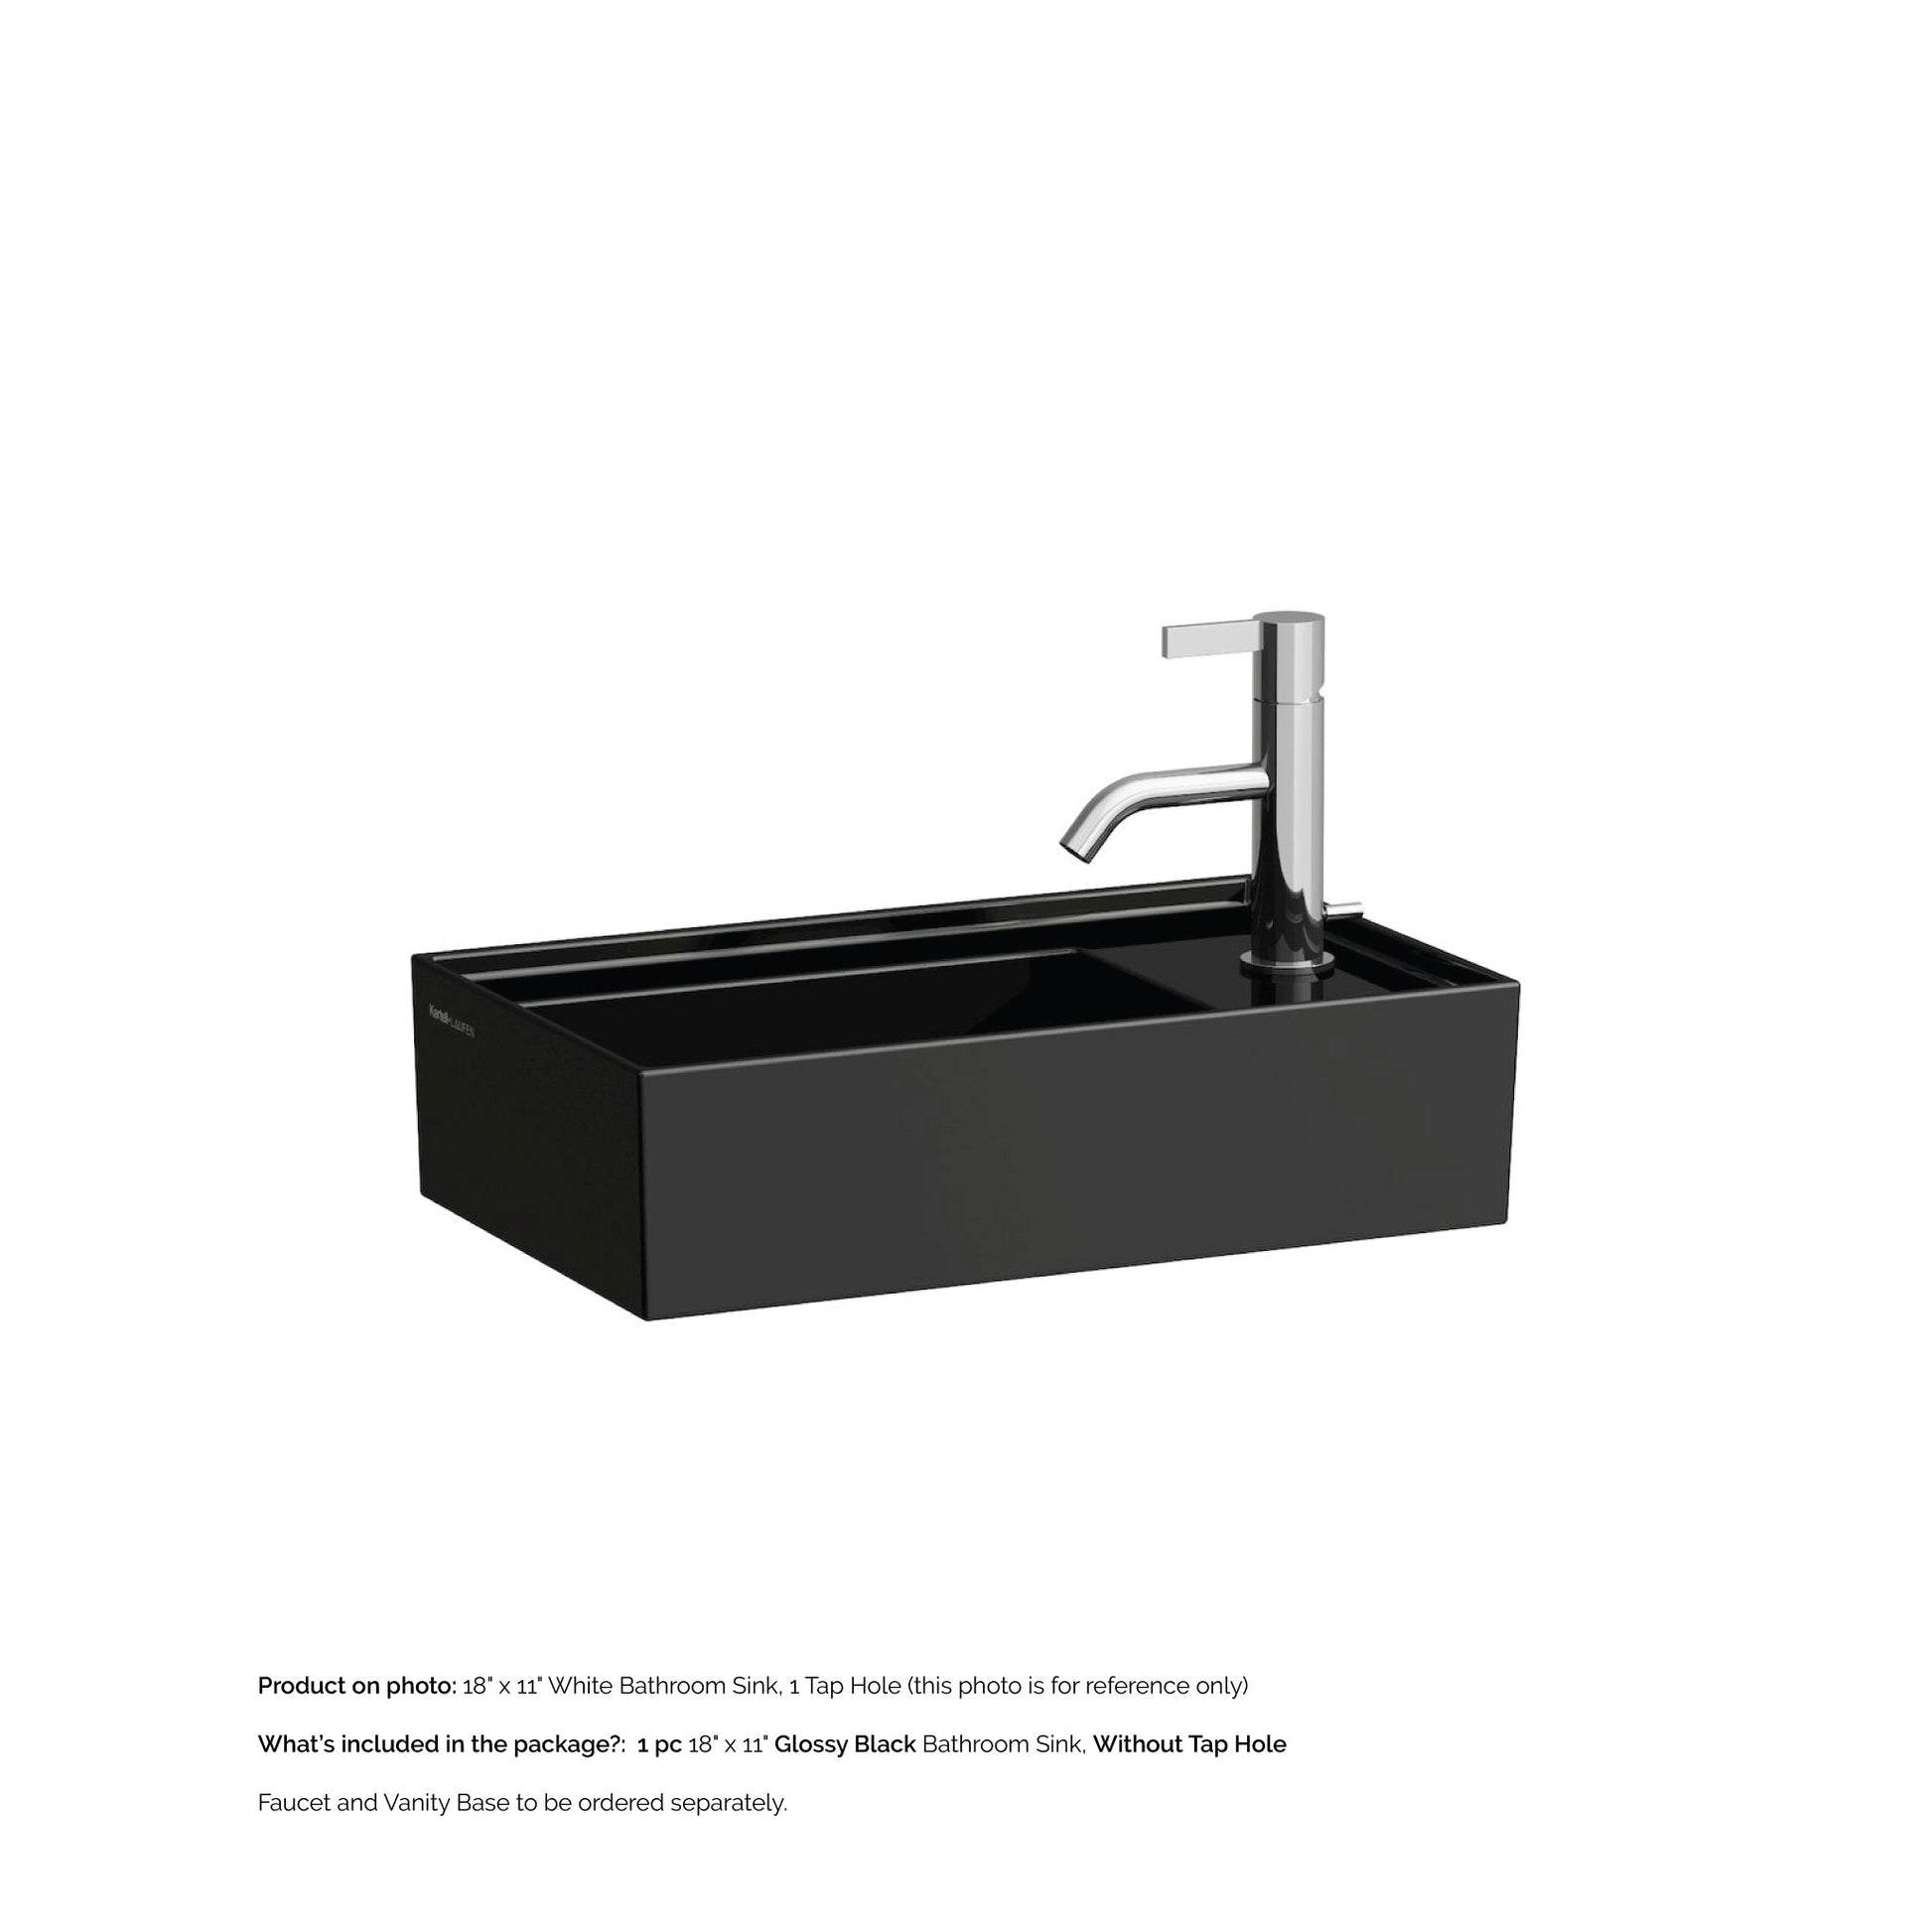 Laufen Kartell 18" x 11" Glossy Black Wall-Mounted Tap Bank-Right Bathroom Sink Without Faucet Hole